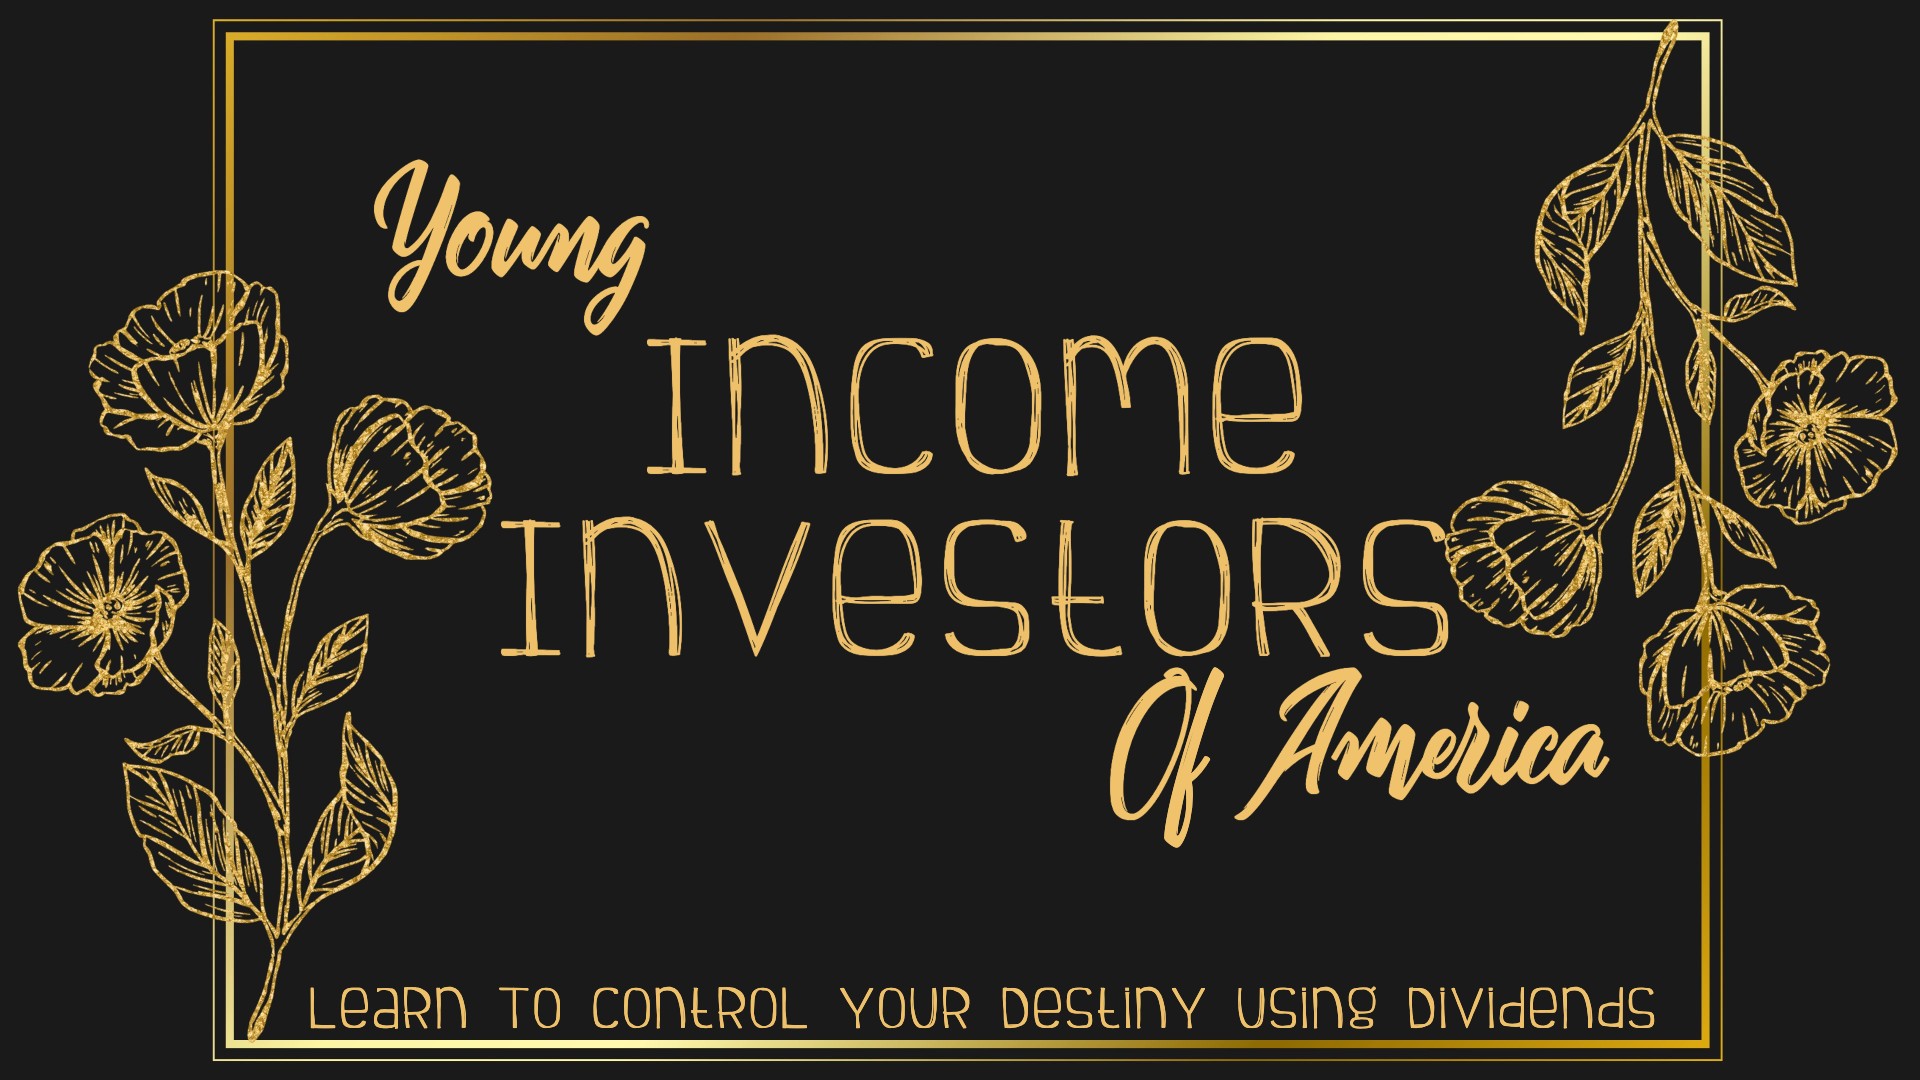 Young Income Invesotrs of America